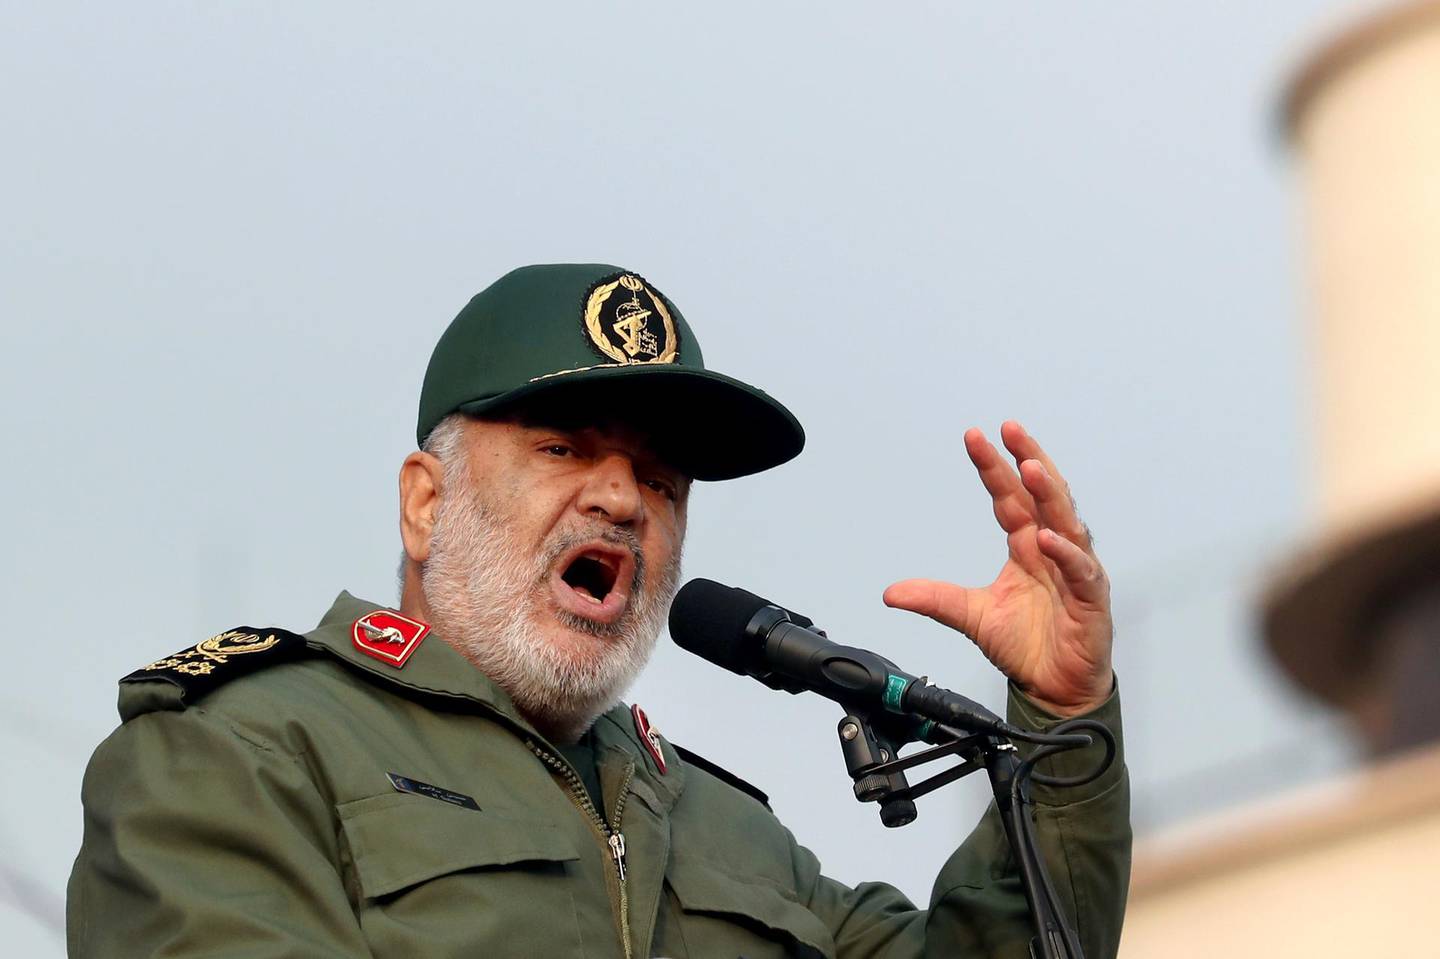 Chief of Iran's Revolutionary Guard Gen. Hossein Salami speaks at a pro-government rally denouncing last weekâ€™s violent protests over a fuel price hike, in Tehran, Iran, Monday, Nov. 25, 2019. (AP Photo/Ebrahim Noroozi)